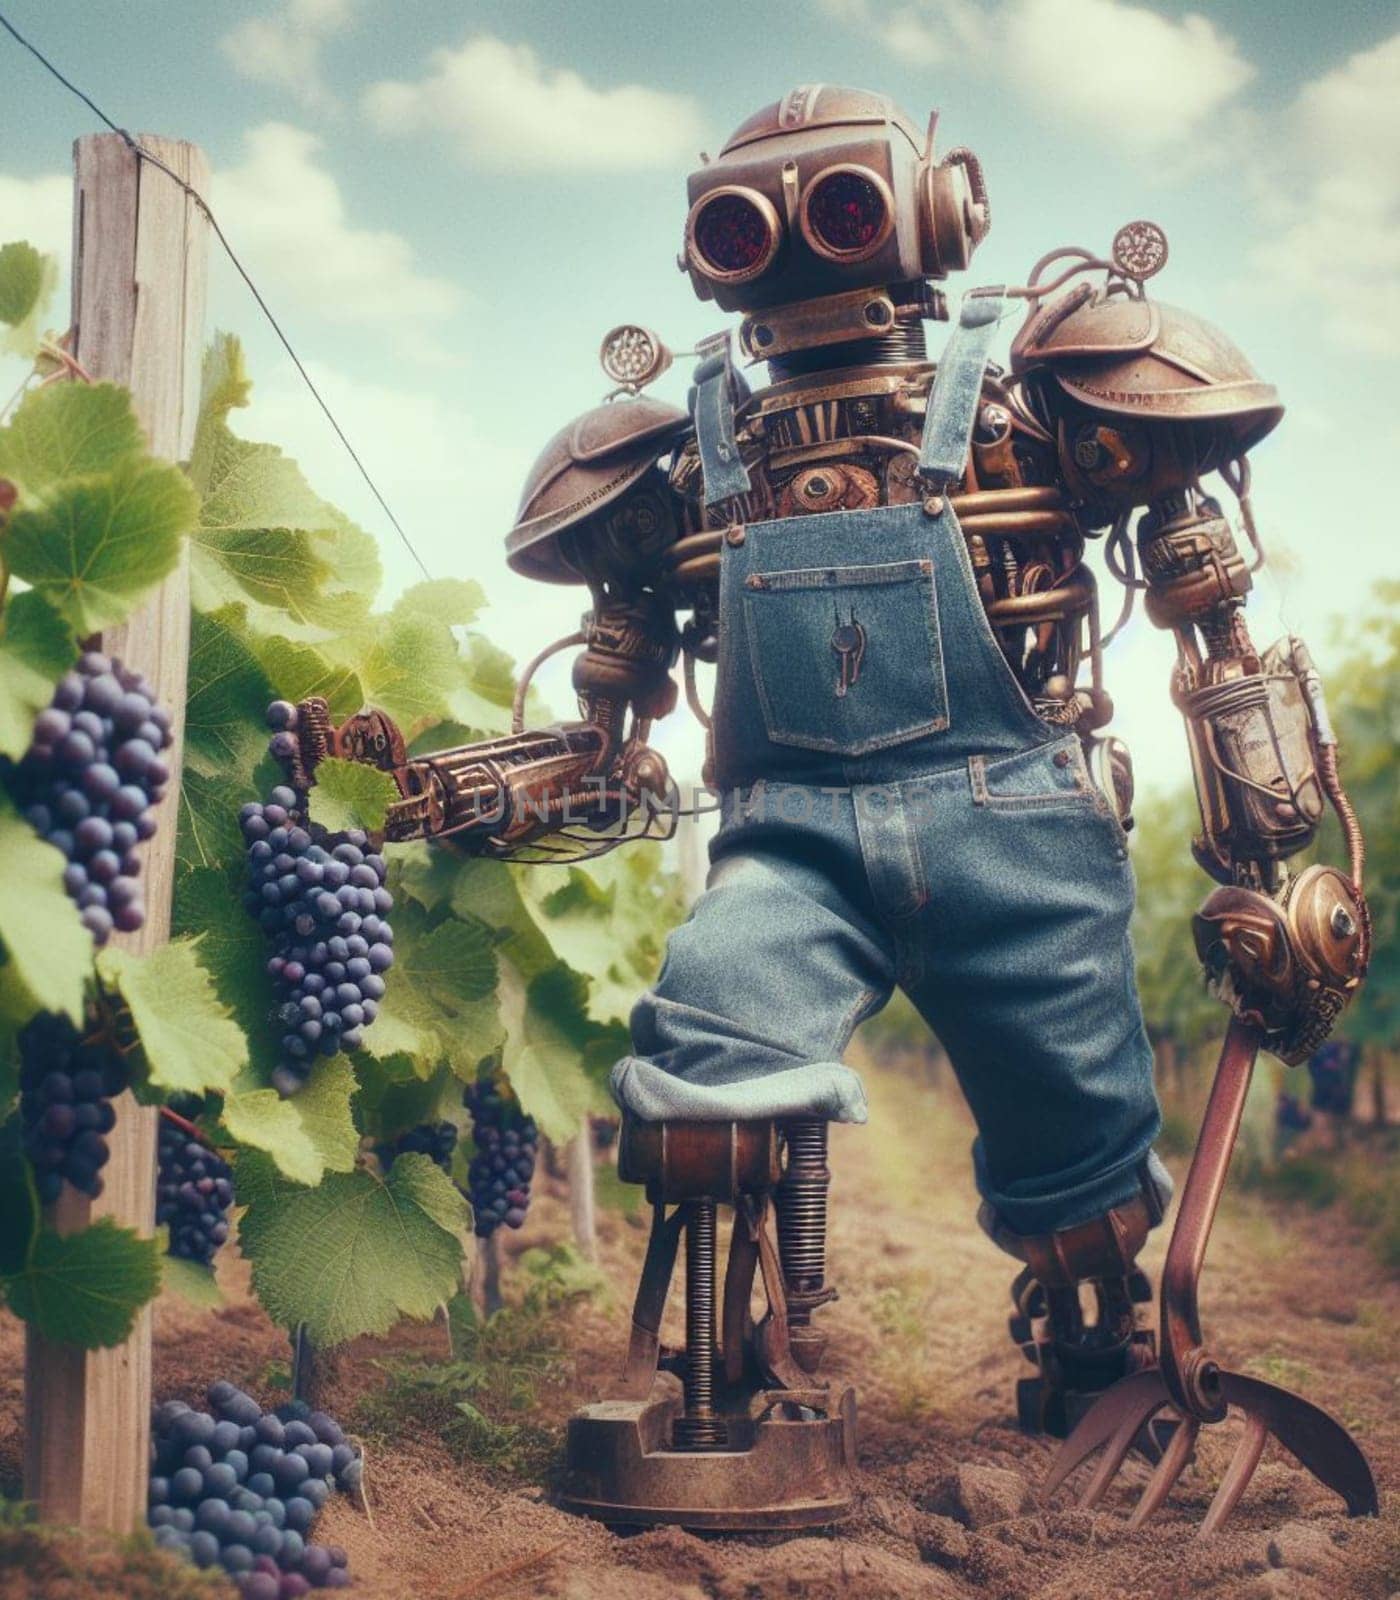 robot working in the farm vegetable garden to grow produce for human consumption by verbano